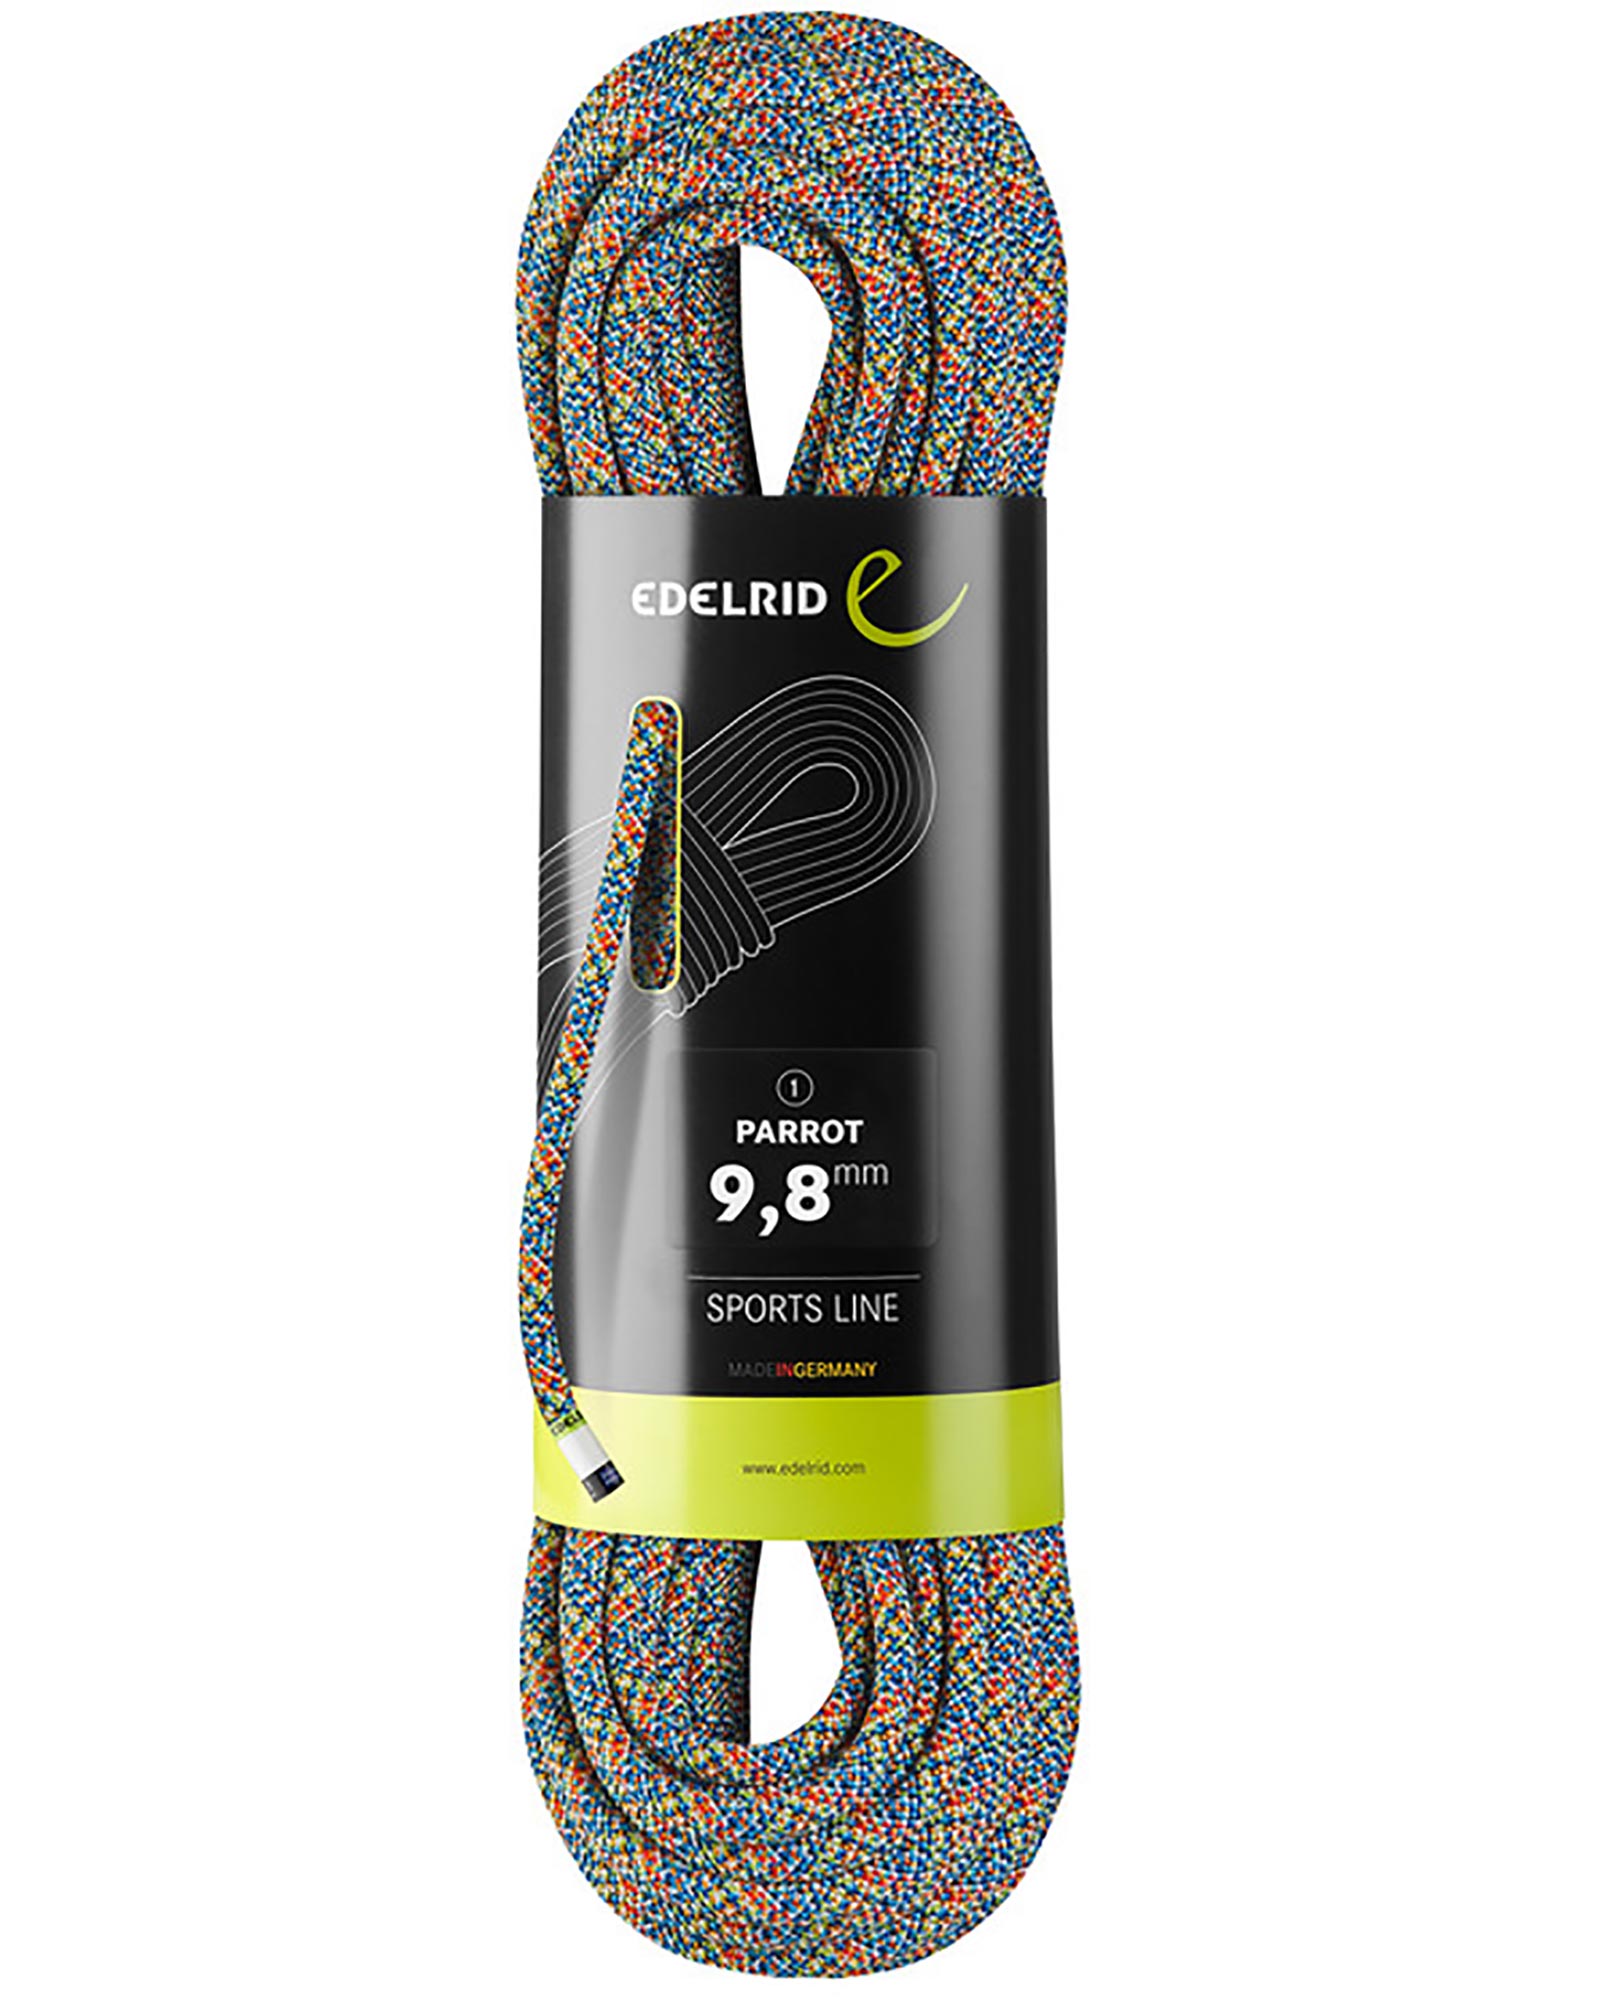 Edelrid Parrot 9.8mm x 60m Rope - Assorted 60m